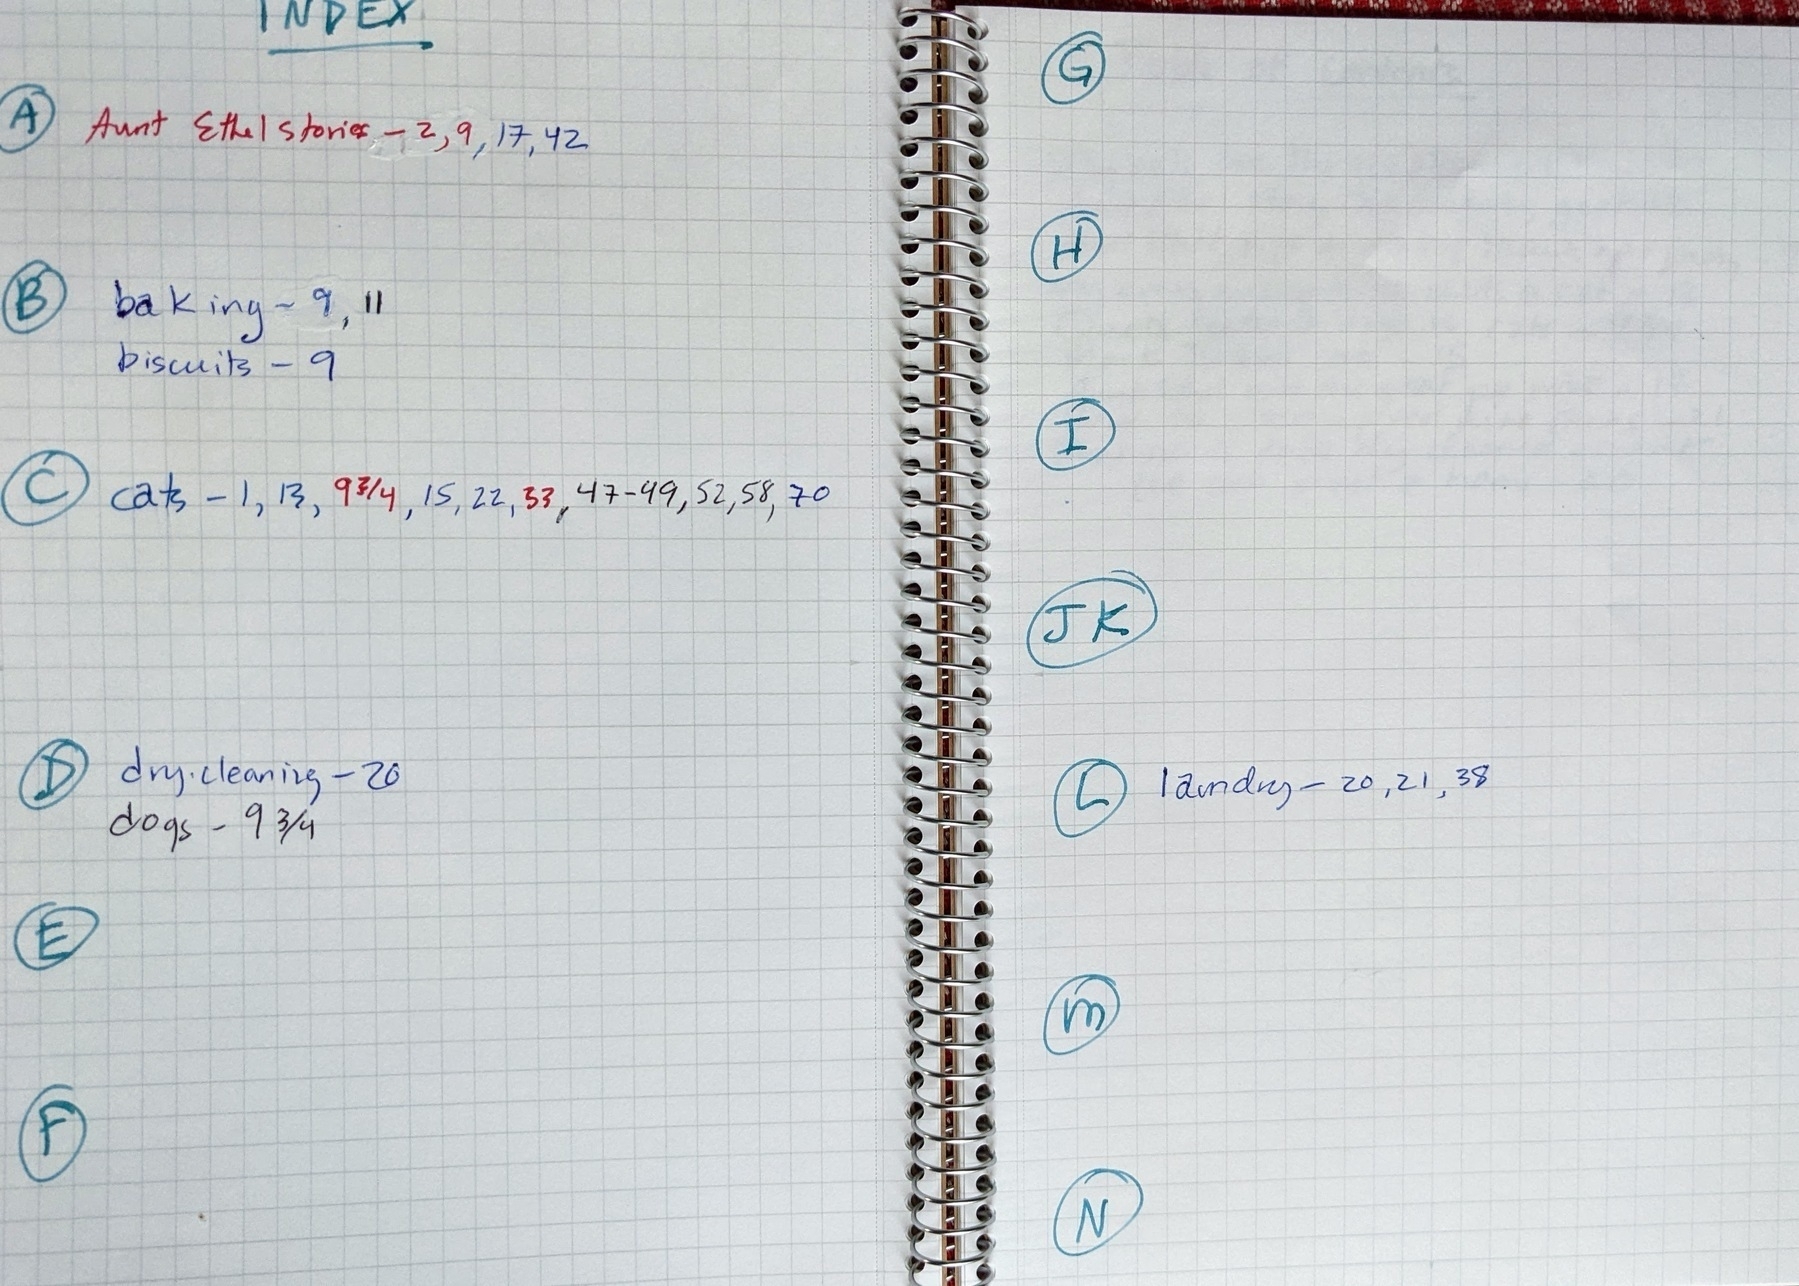 handwritten index in a paper notebook, with page numbers listed next to topic keywords